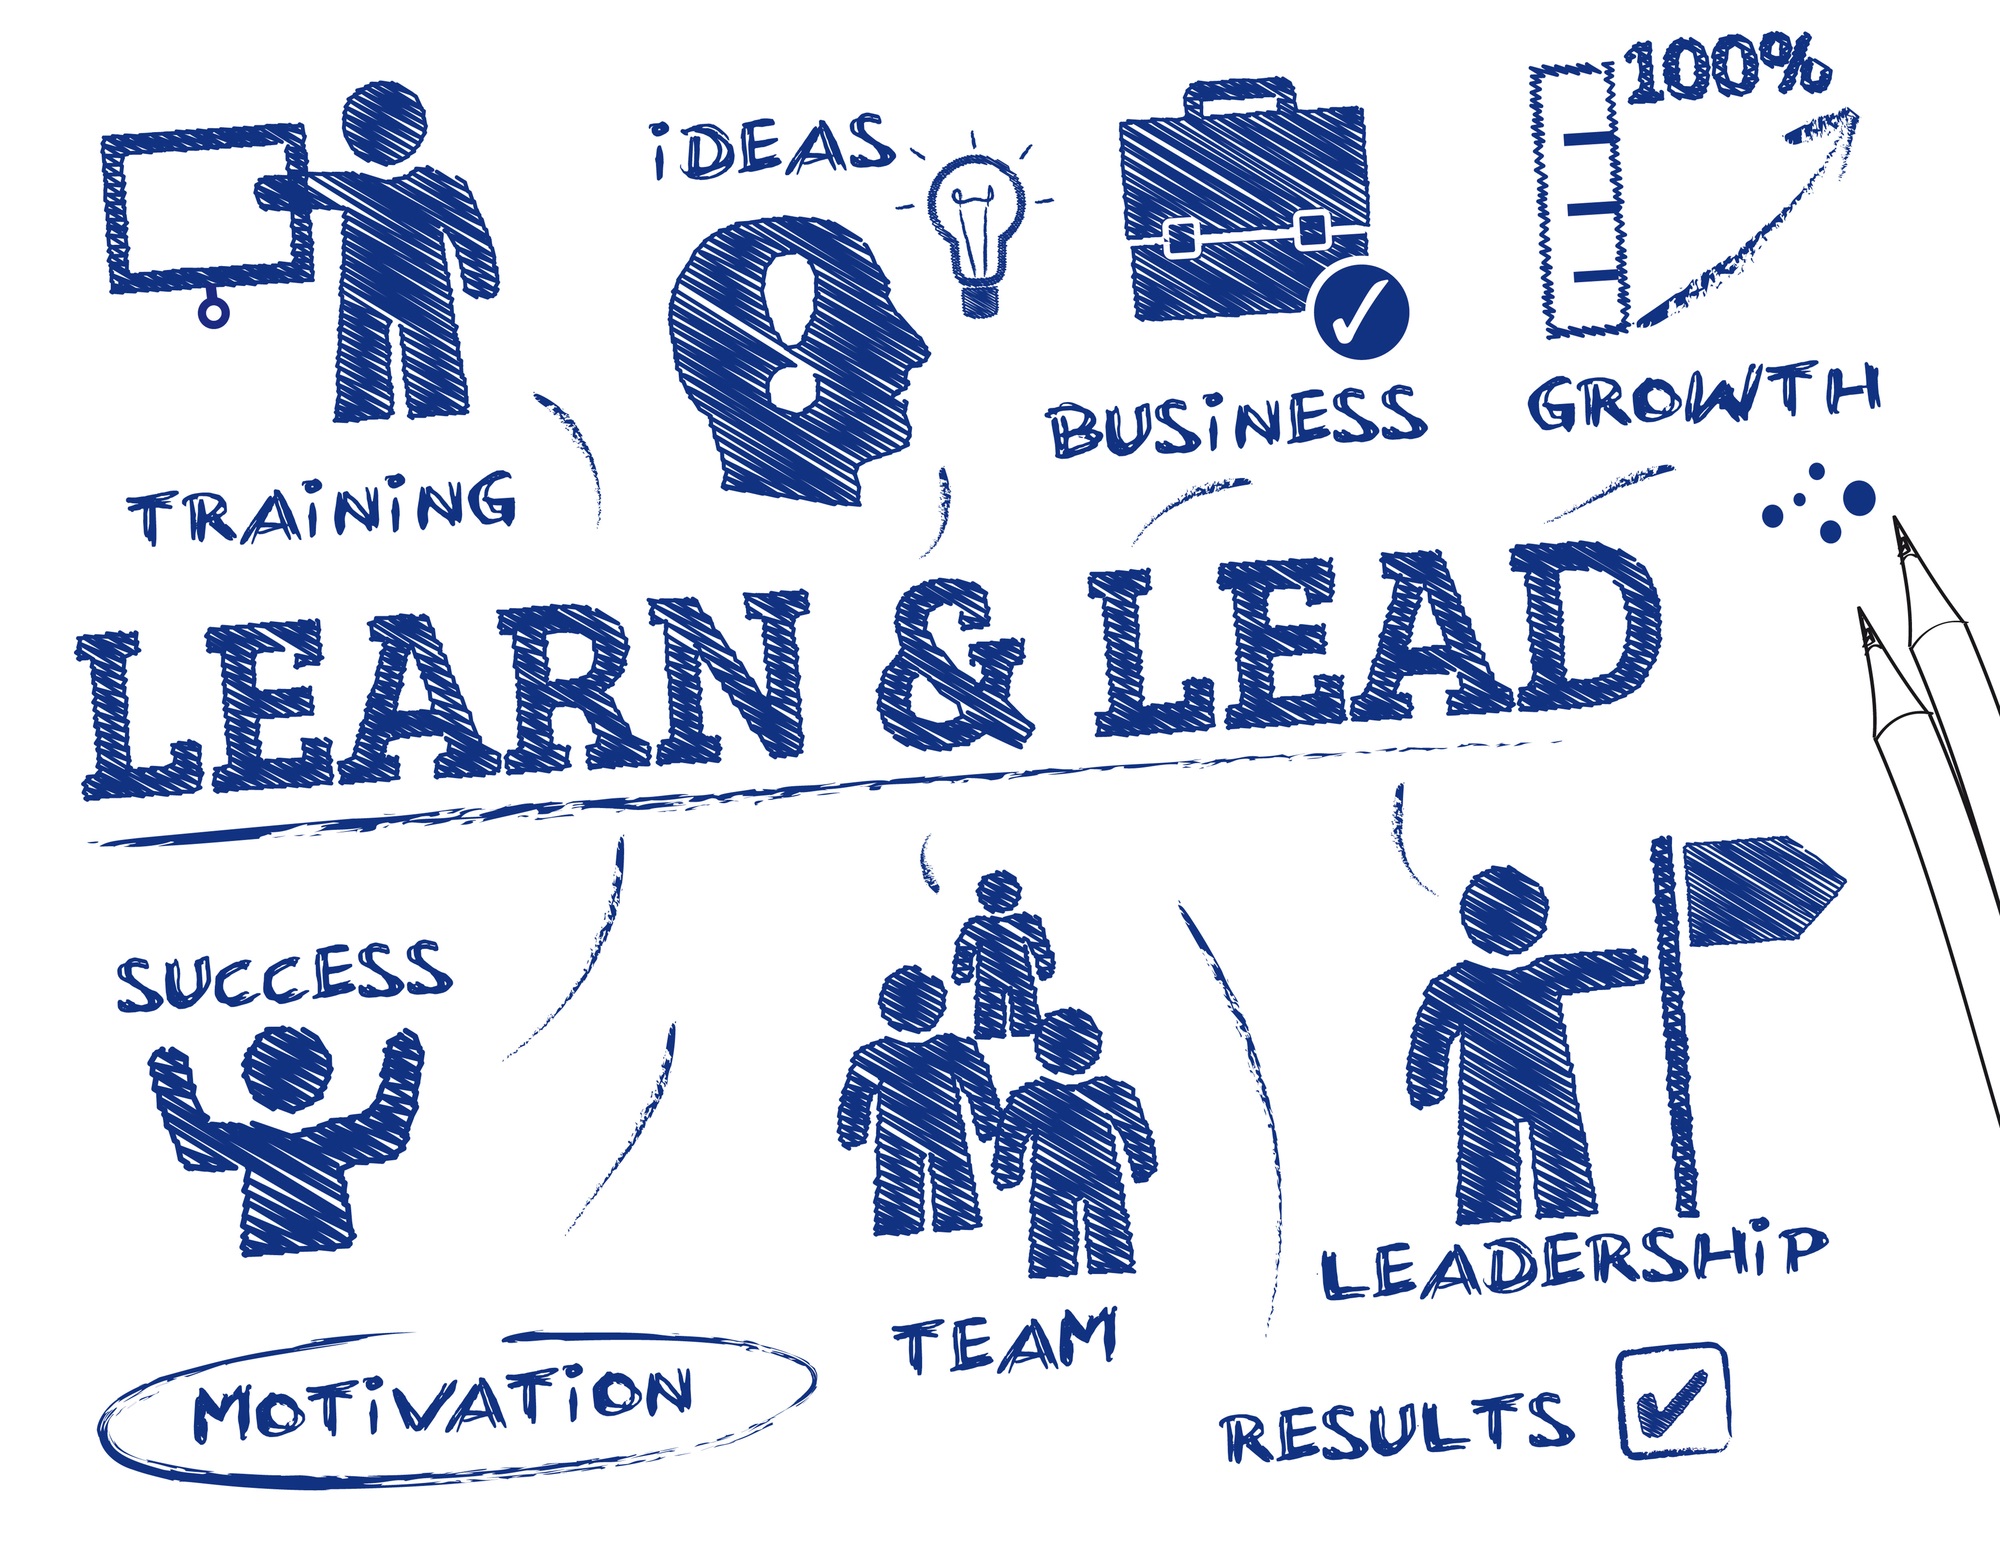 Learn and Lead. Chart with keywords and icons